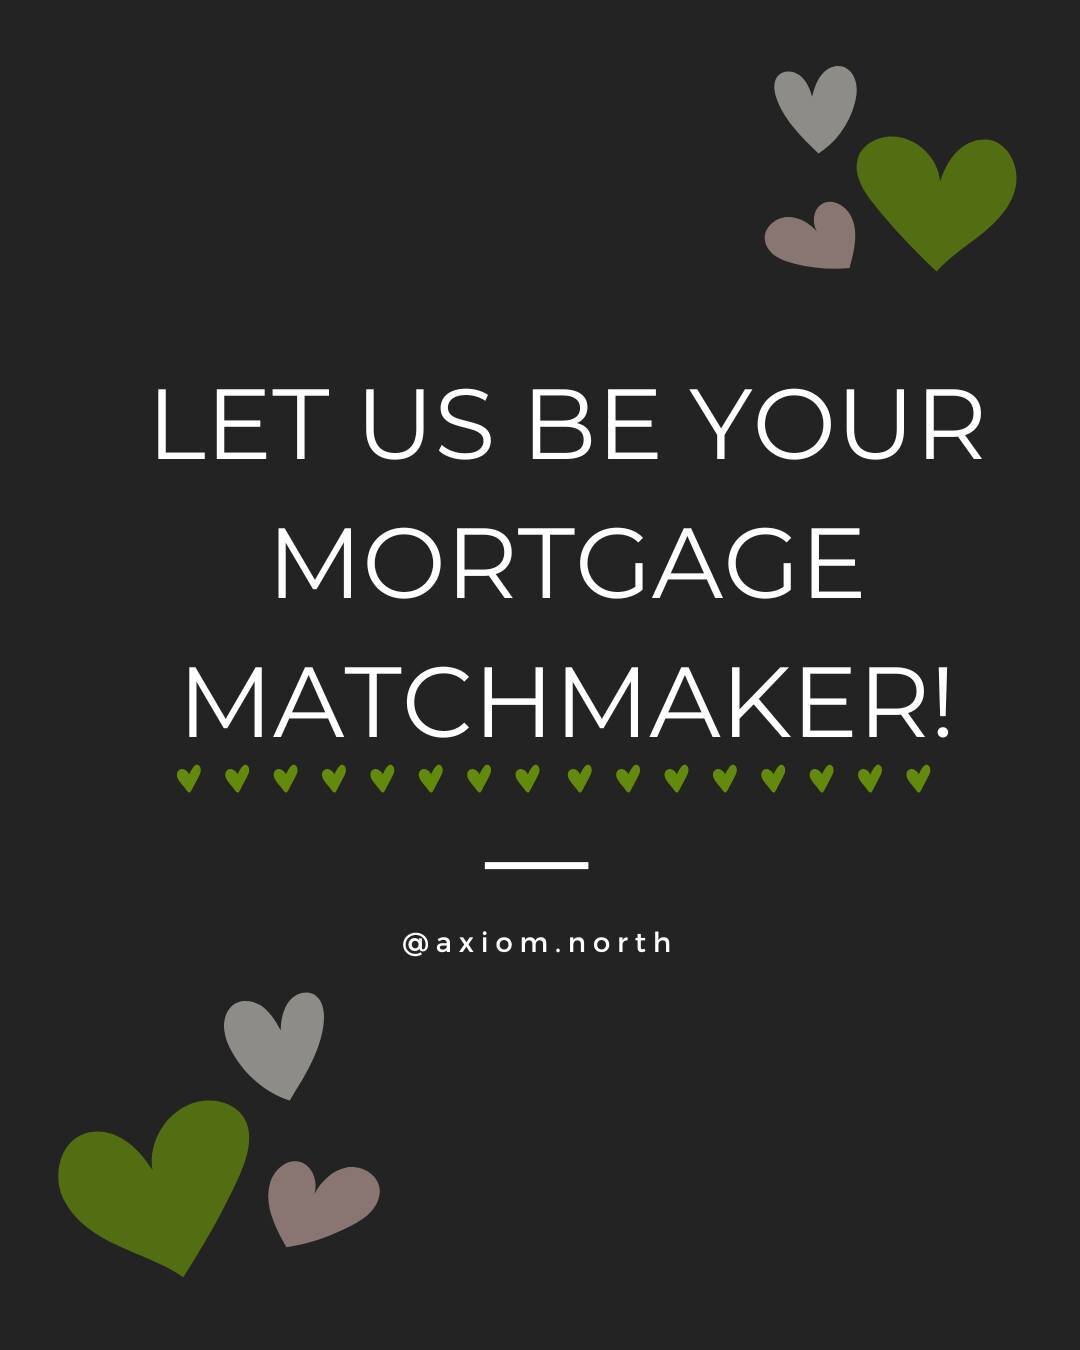 This Valentine's Day - we're finding you the perfect mortgage match! Here's why choosing us as your mortgage matchmaker beats a bank any day:

Just like a perfect date, your mortgage should be tailored to your desires. We don't believe in one-size-fi